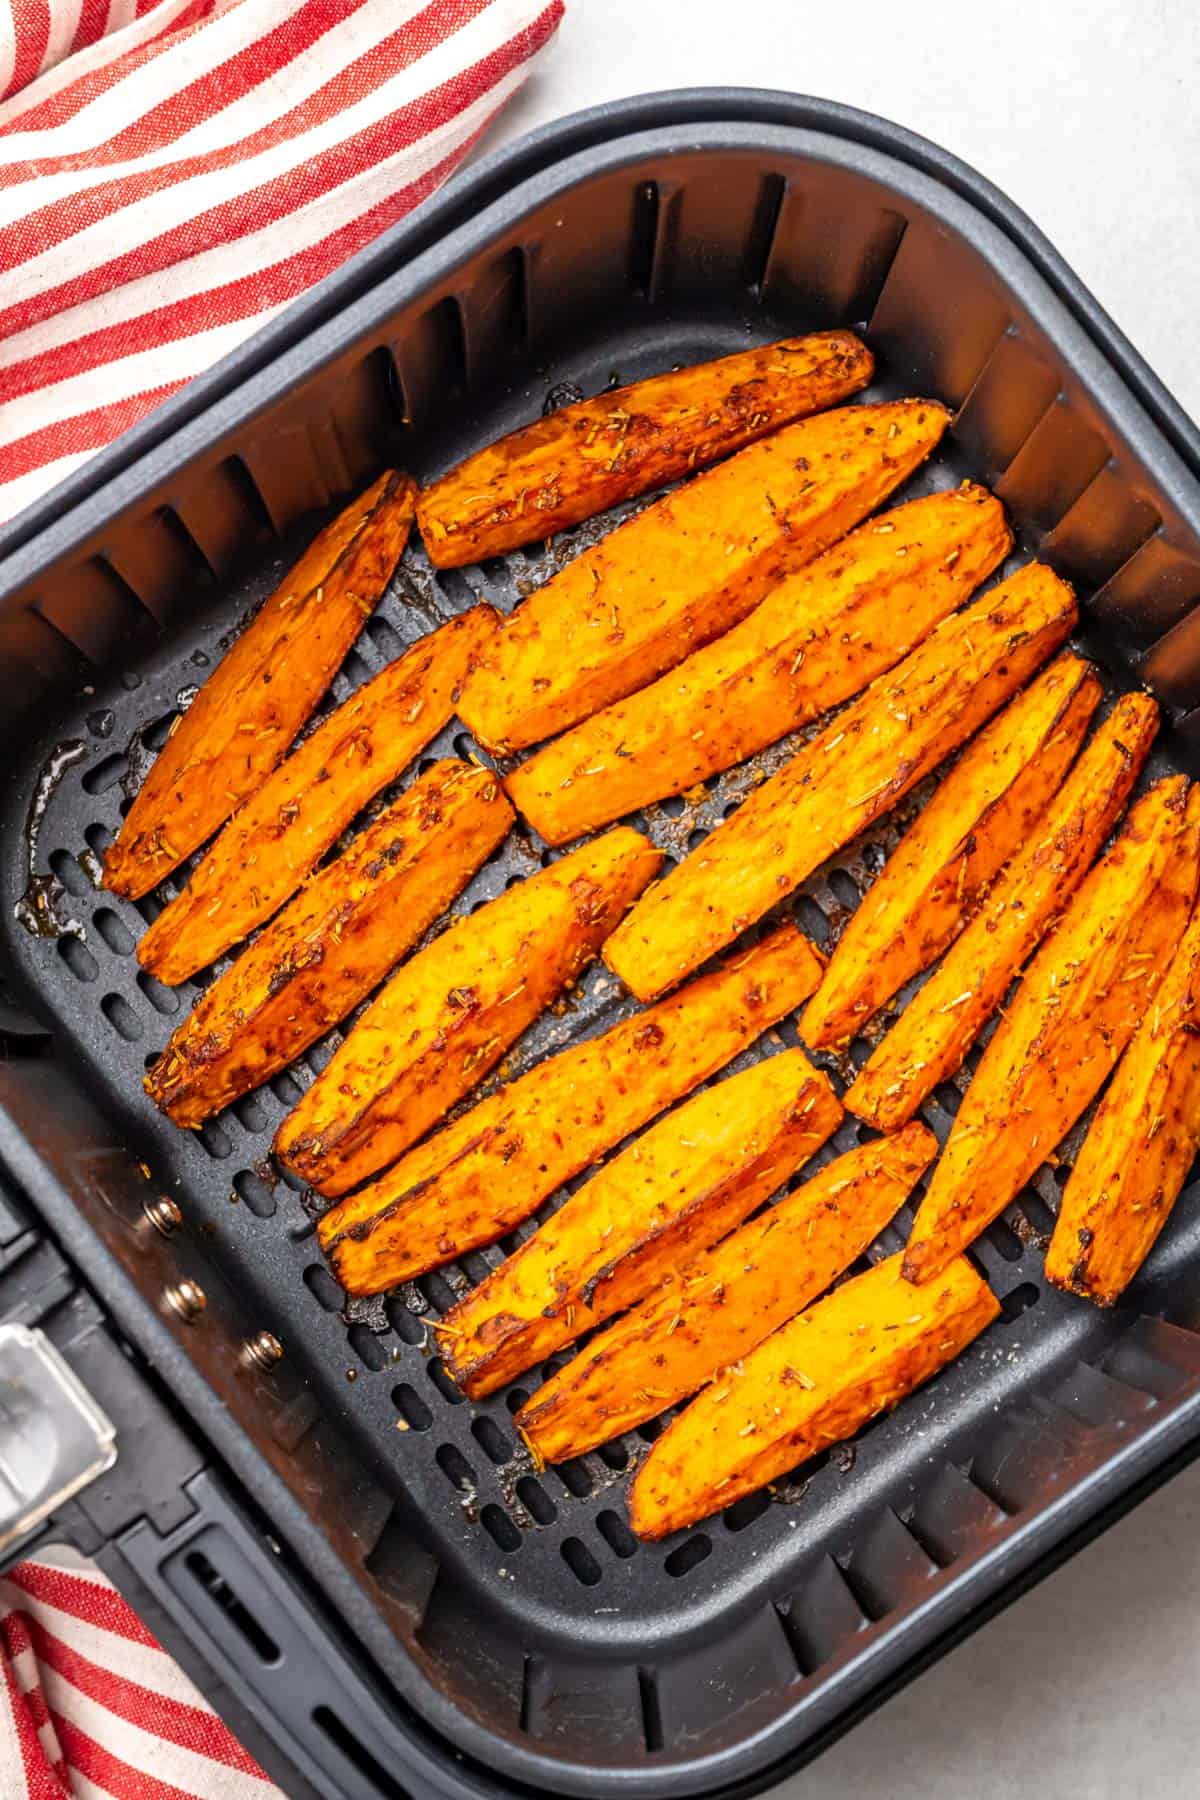 cooked and browned sweet potato wedges in the air fryer basket with a cloth